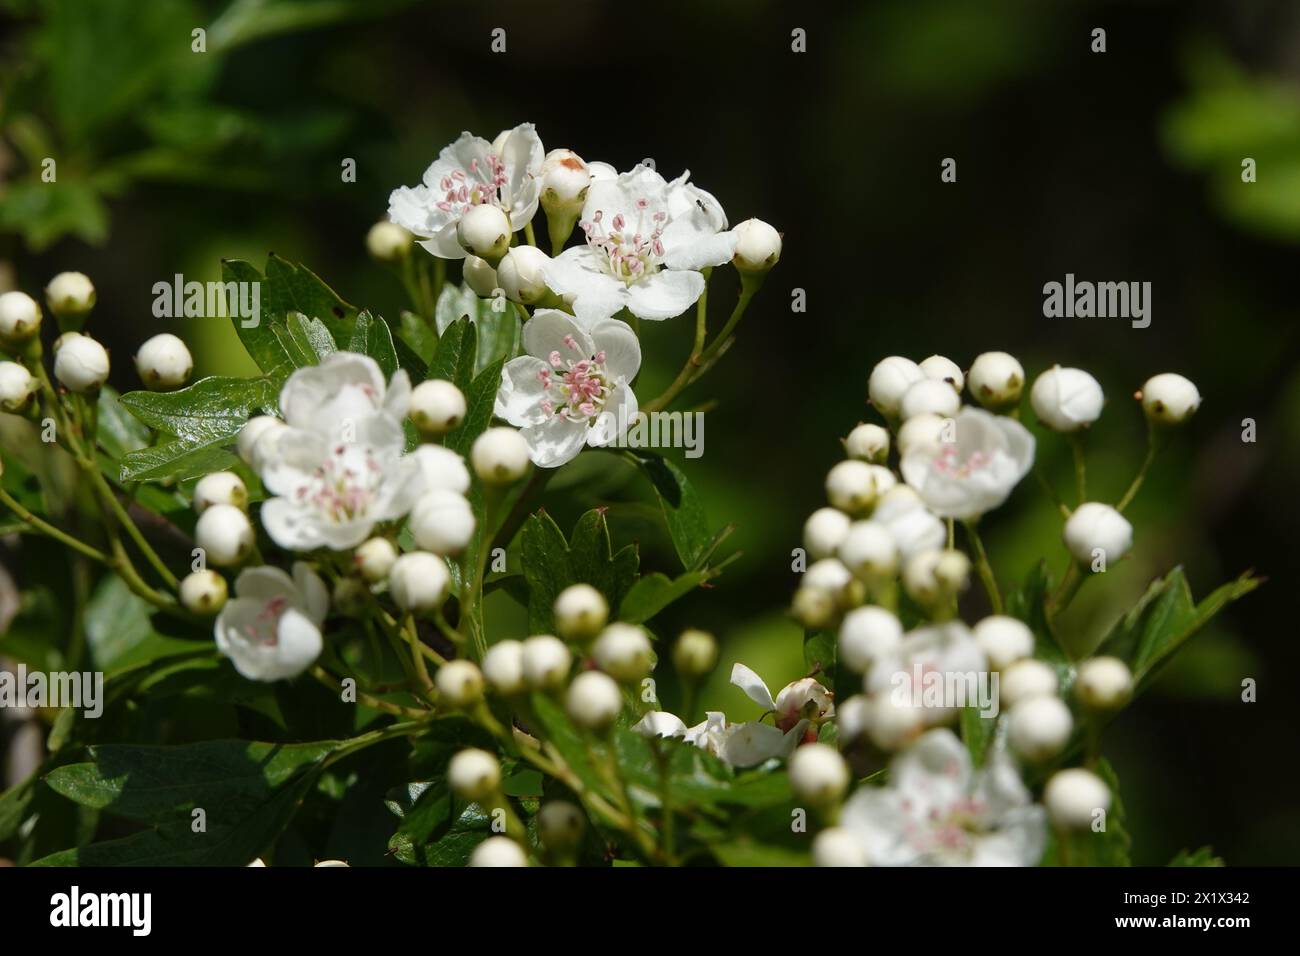 Spring UK, Hawthorn Flowers and Buds Banque D'Images